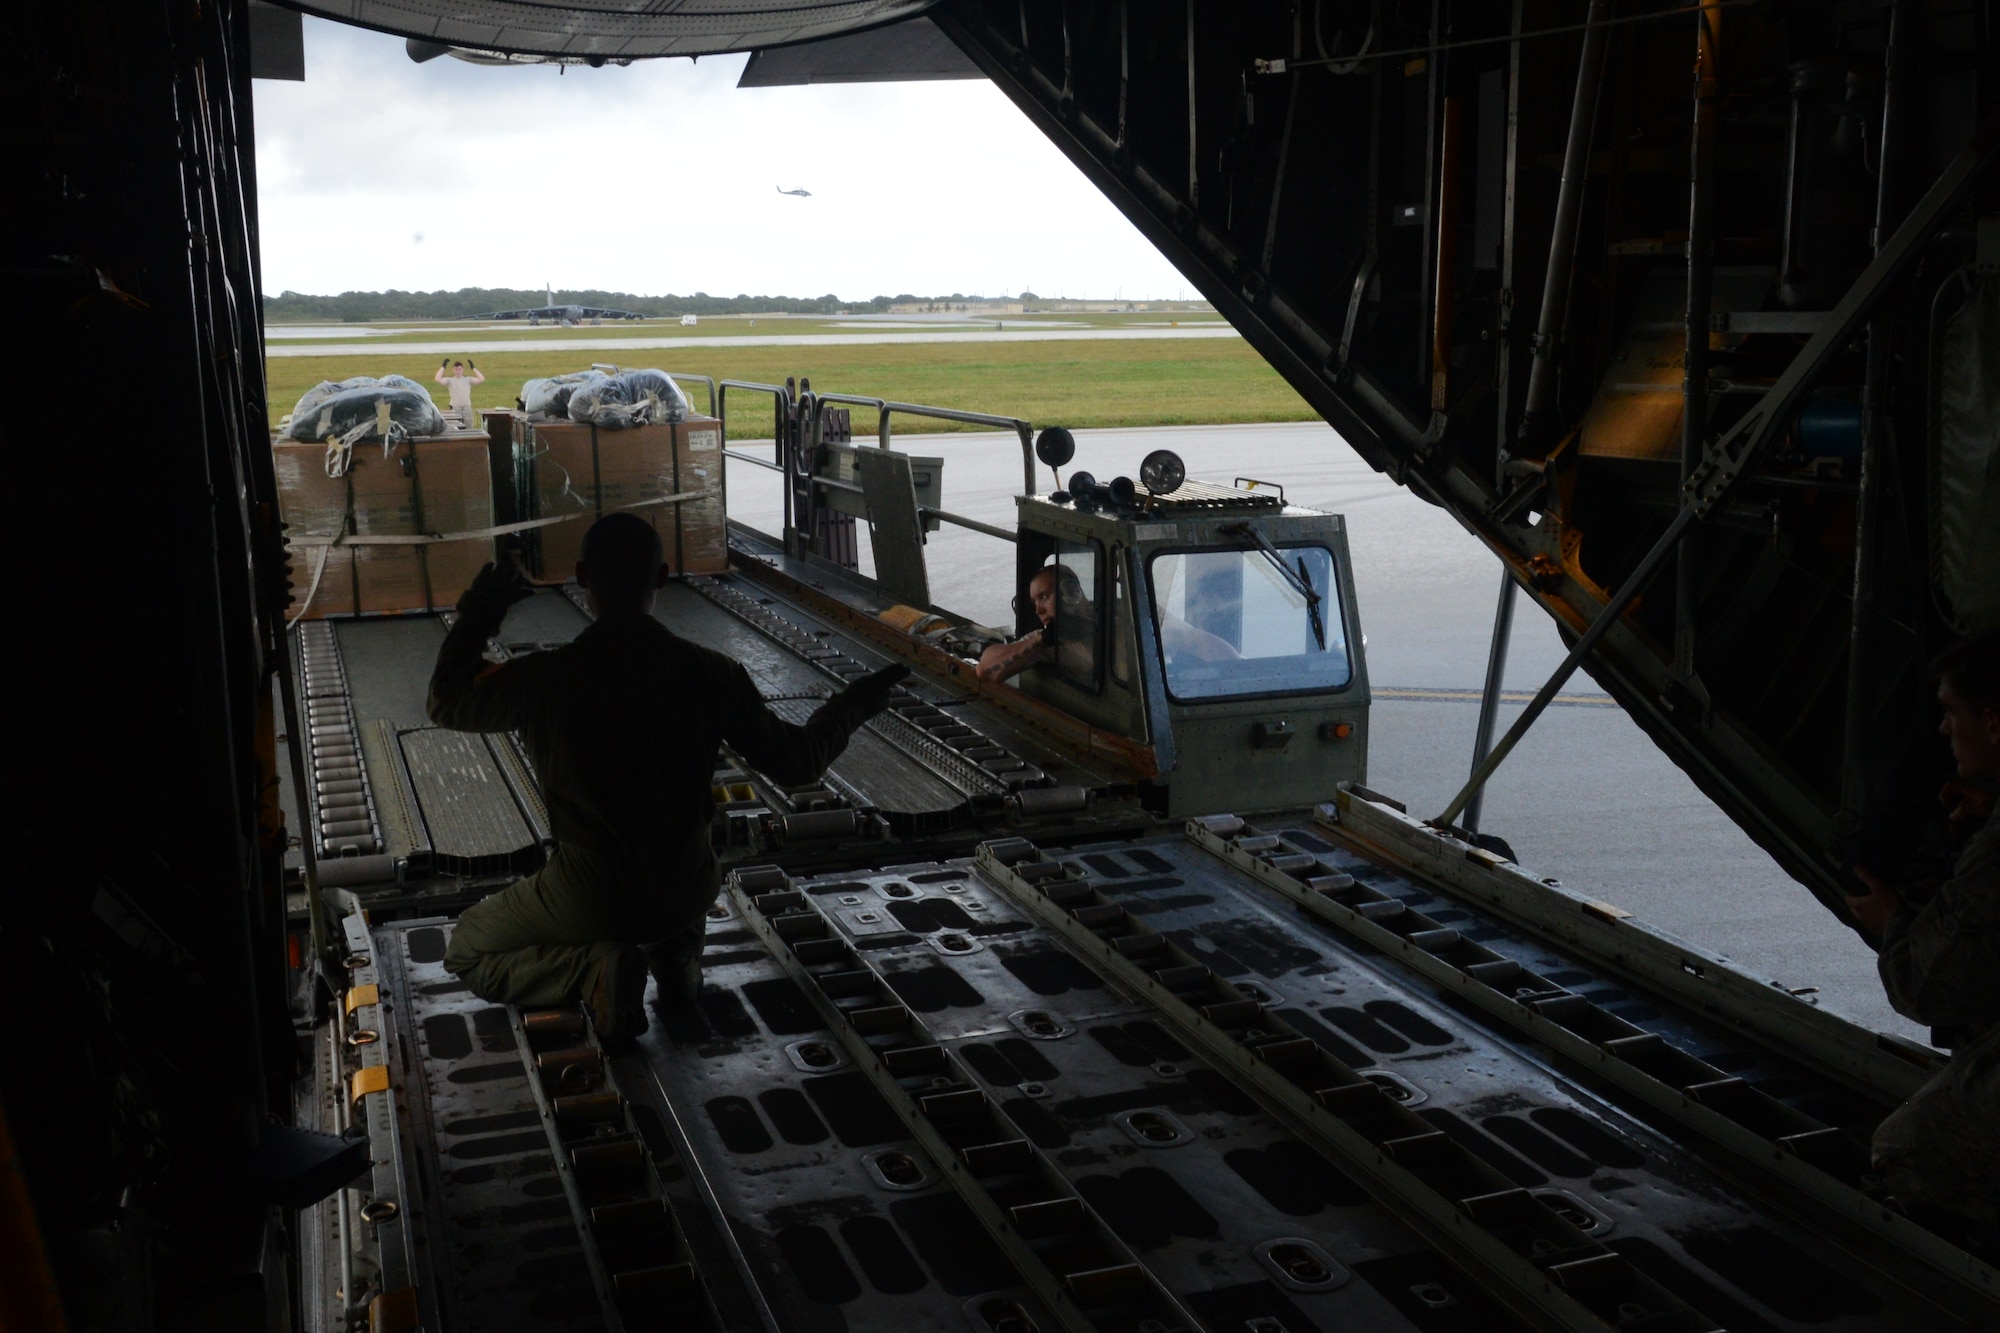 Airman 1st Class David Martinez, 36th Airlift Squadron loadmaster, directs a K-loader to align with a C-130 Hercules aircraft for Operation Christmas Drop at Andersen Air Force Base, Guam, Dec. 9, 2013. This year marks the 62nd year of Operation Christmas Drop, which began in 1952, making it the world's longest running airdrop mission. (U.S. Air Force photo by Airman 1st Class Emily A. Bradley/Released)